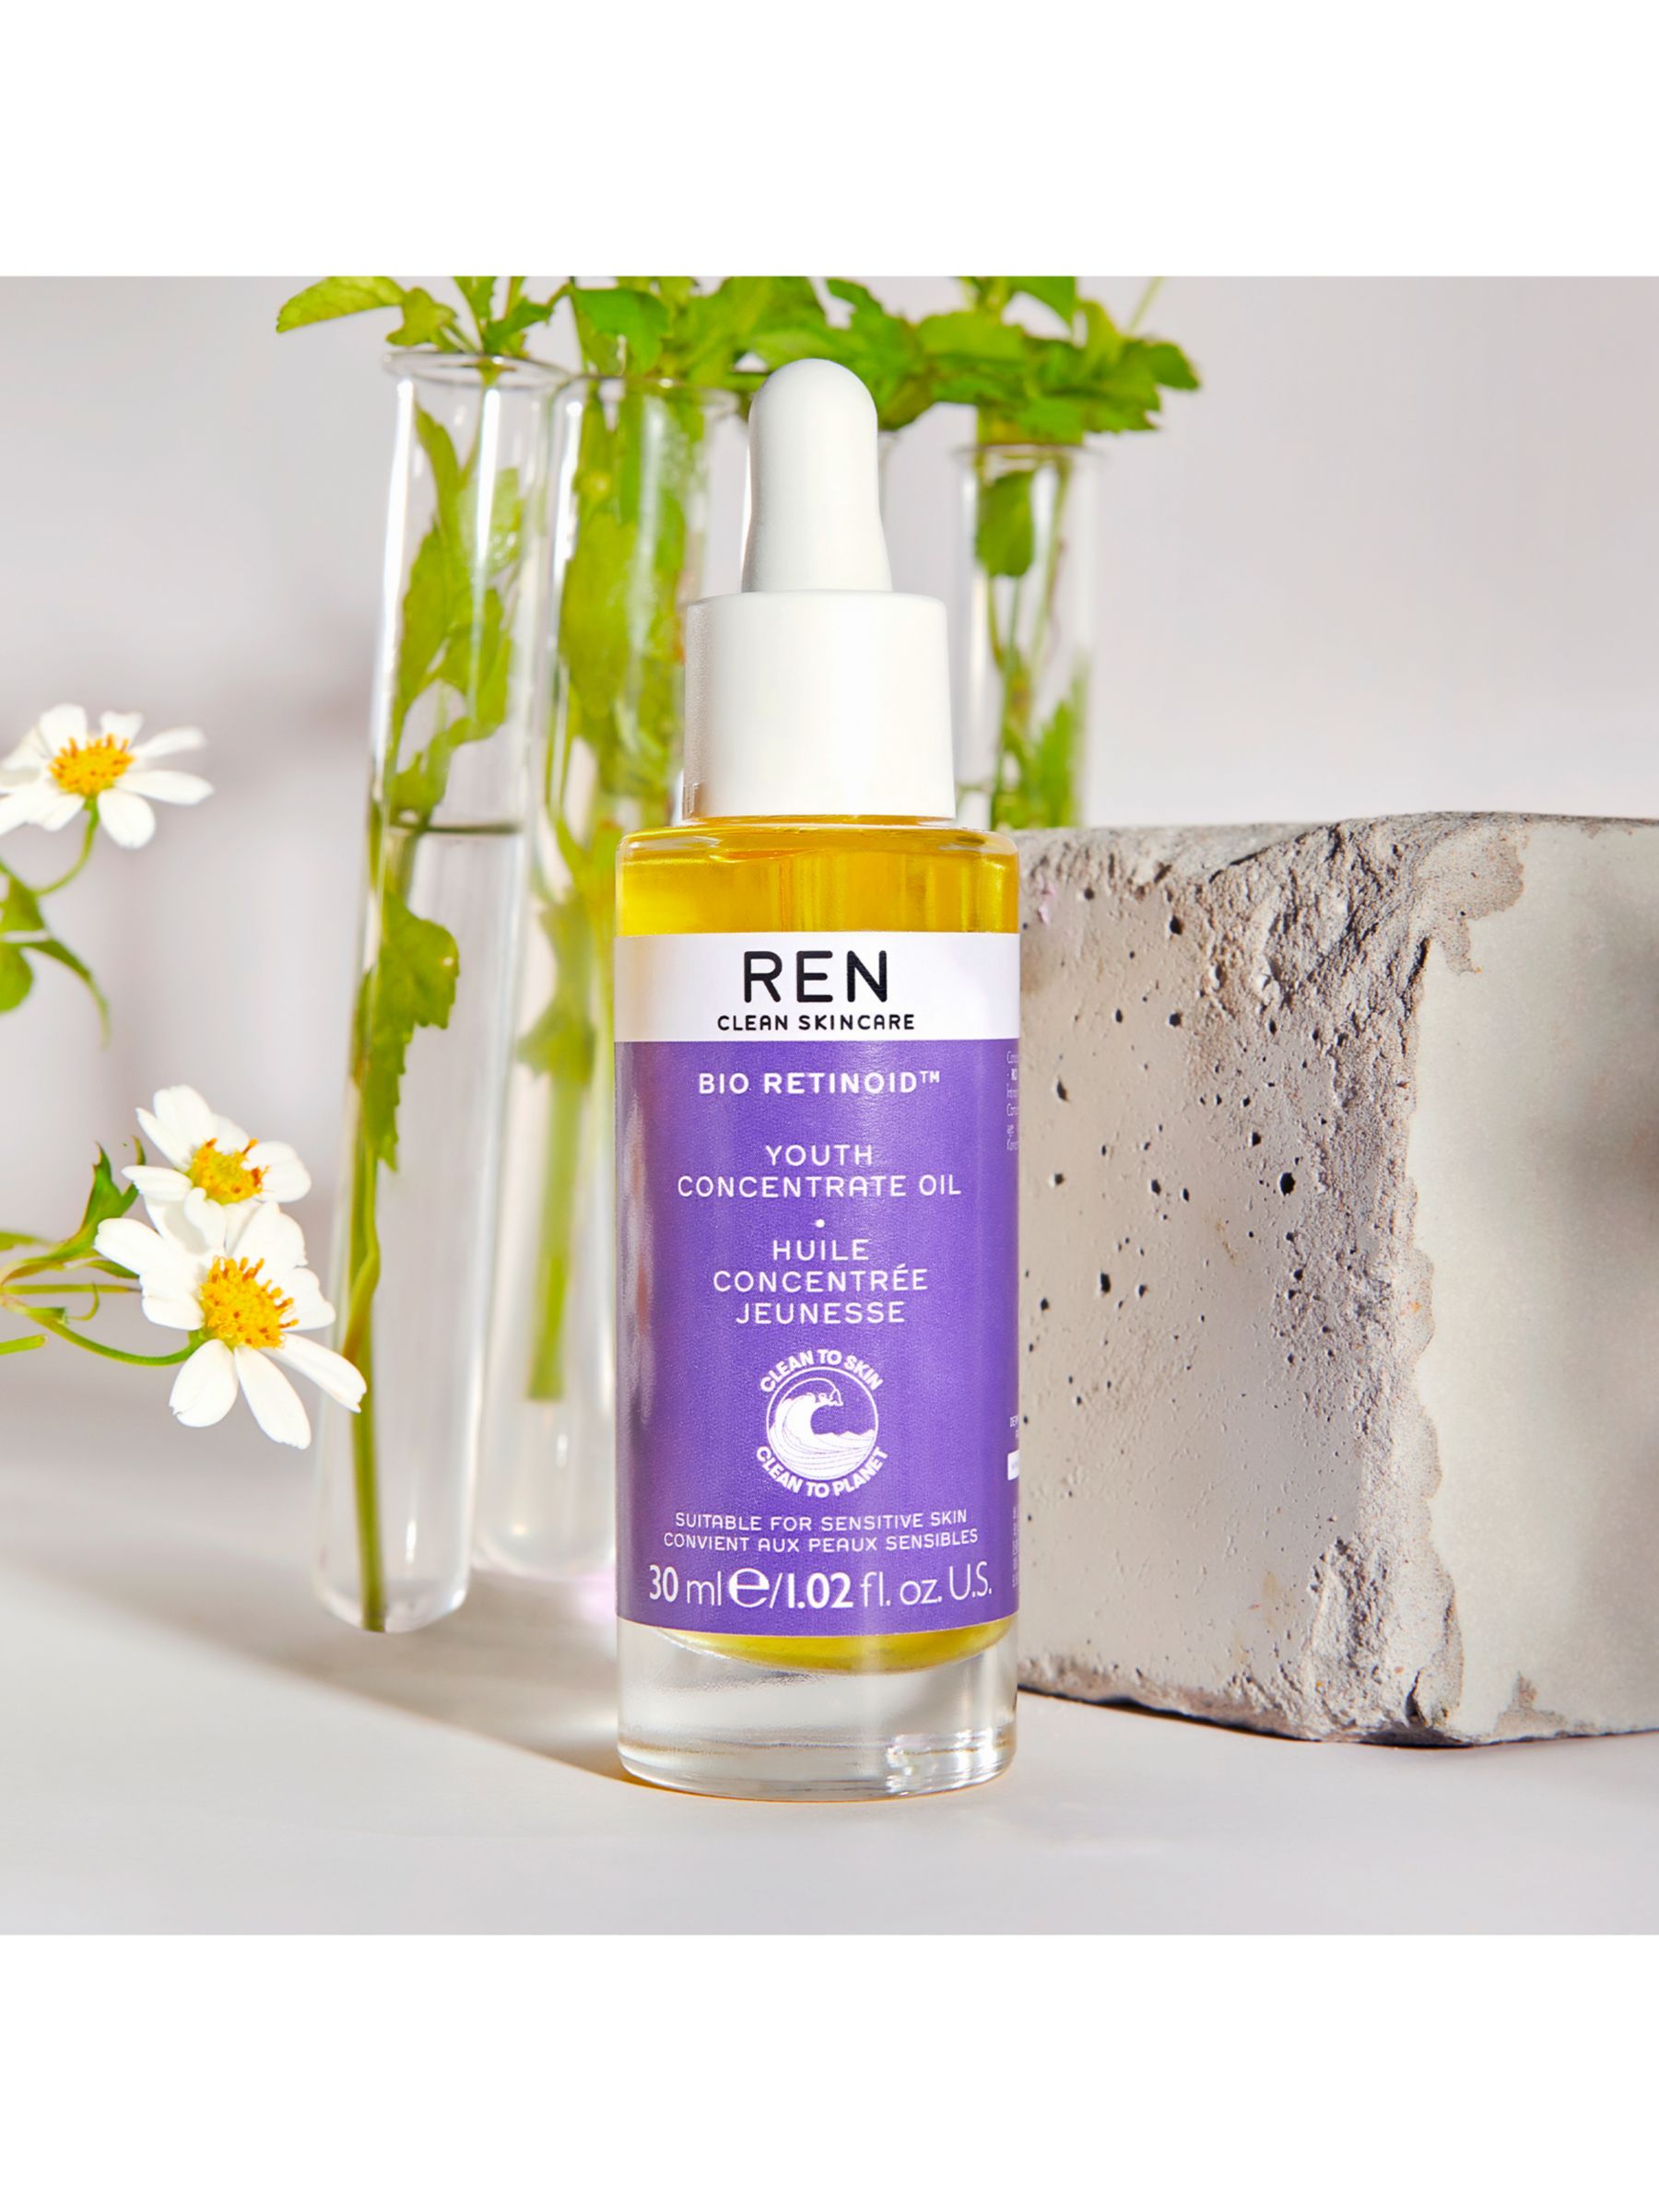 REN Clean Skincare Bio Retinoid™ Youth Concentrate Oil, 30ml 2